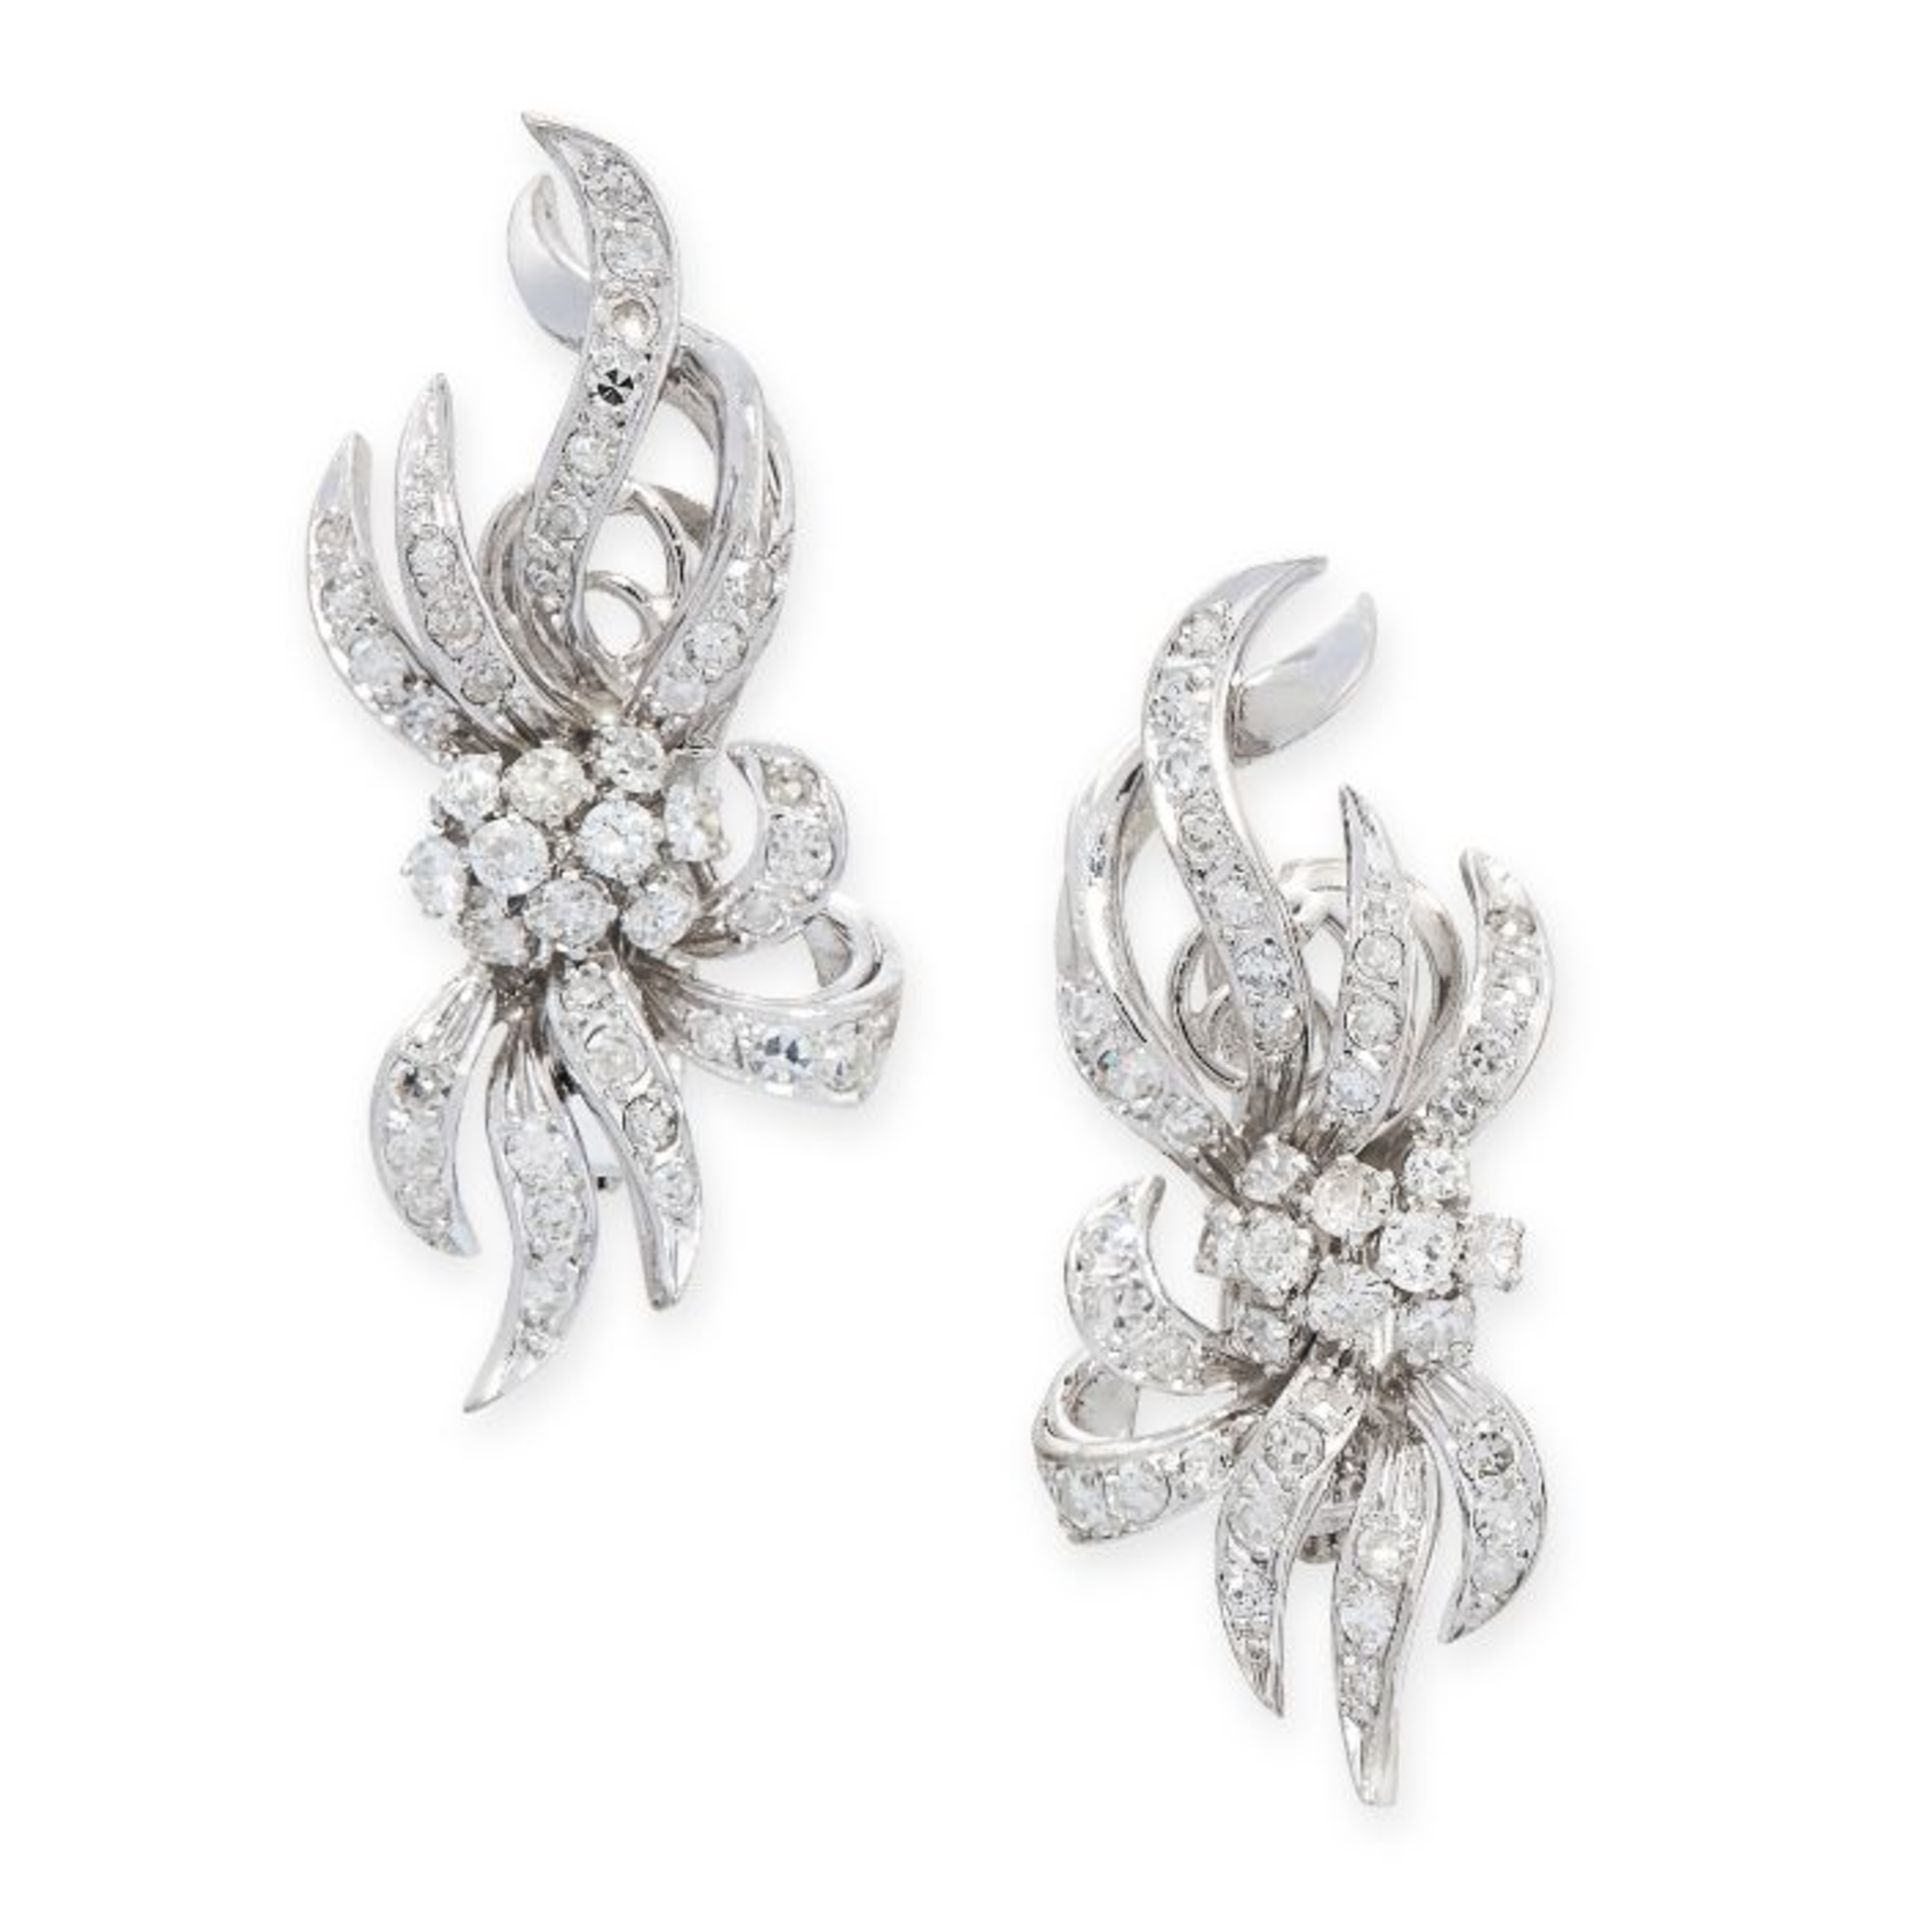 A PAIR OF DIAMOND CLIP EARRINGS the scrolling bodies set throughout with round cut and single cut